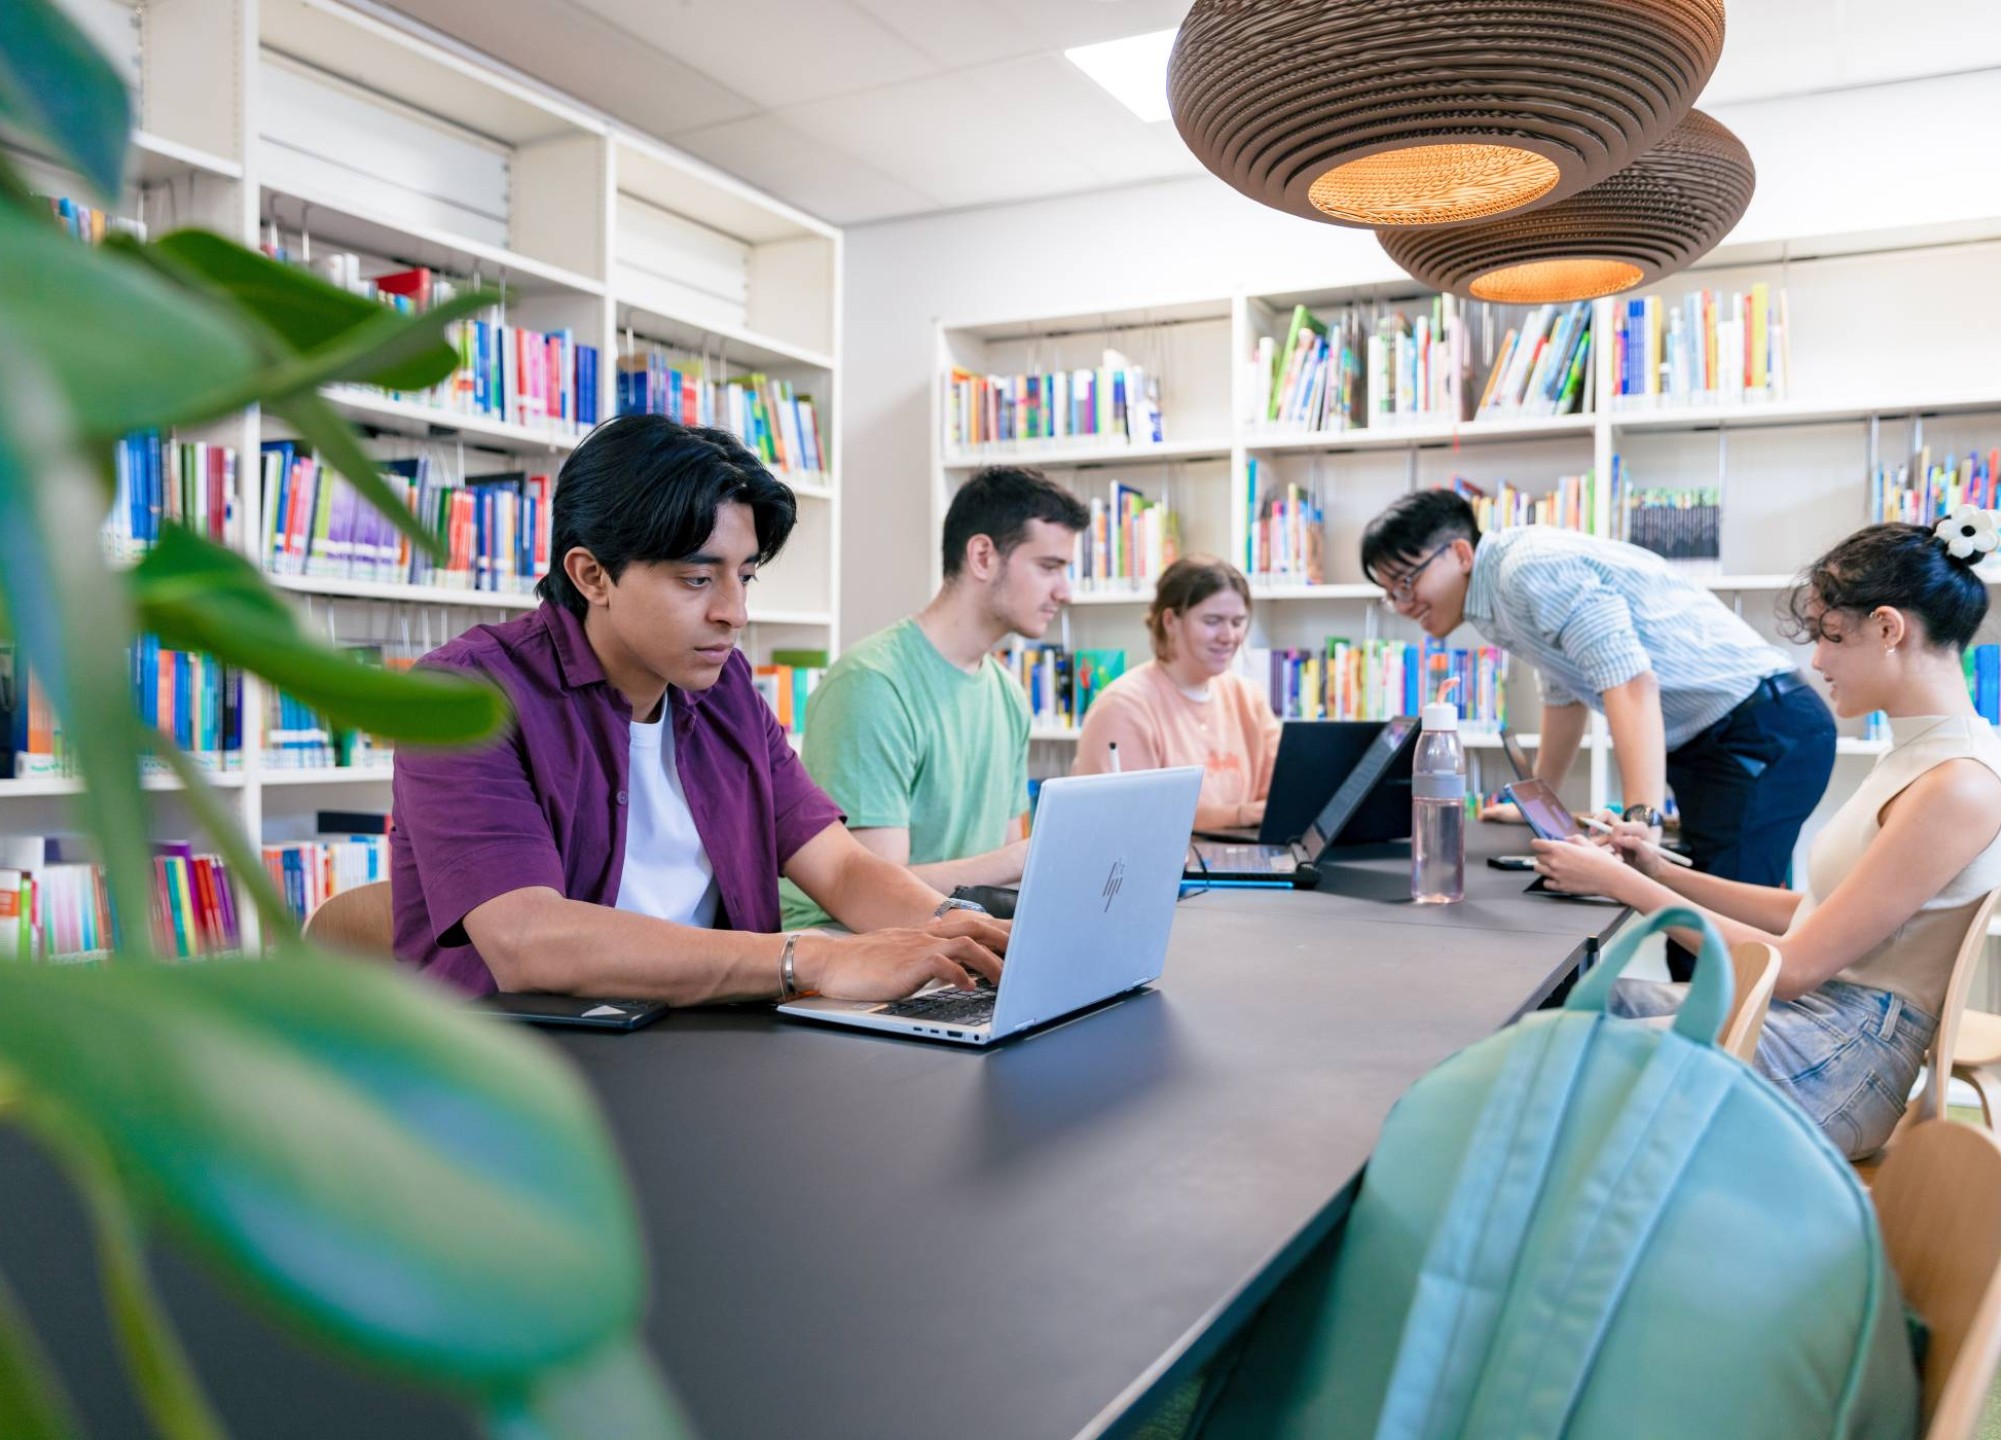 International students Diego, Tam, Nyugen, Noa and Andrei studying in the library at the Arnhem campus of HAN University of Applied Sciences.